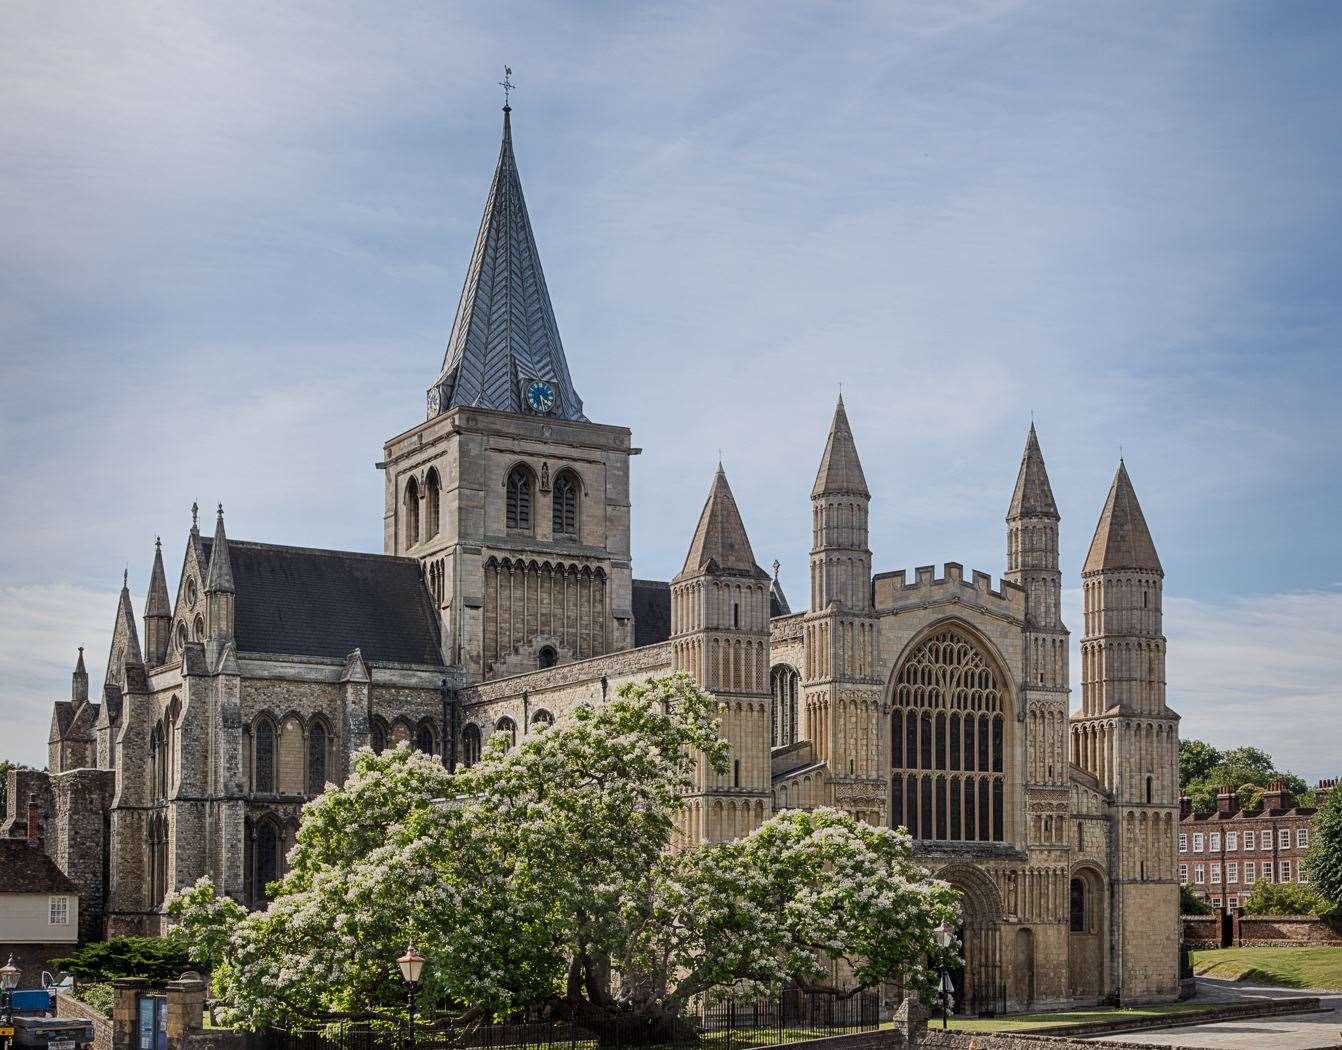 Rochester Cathedral is one of the oldest cathedrals in the country